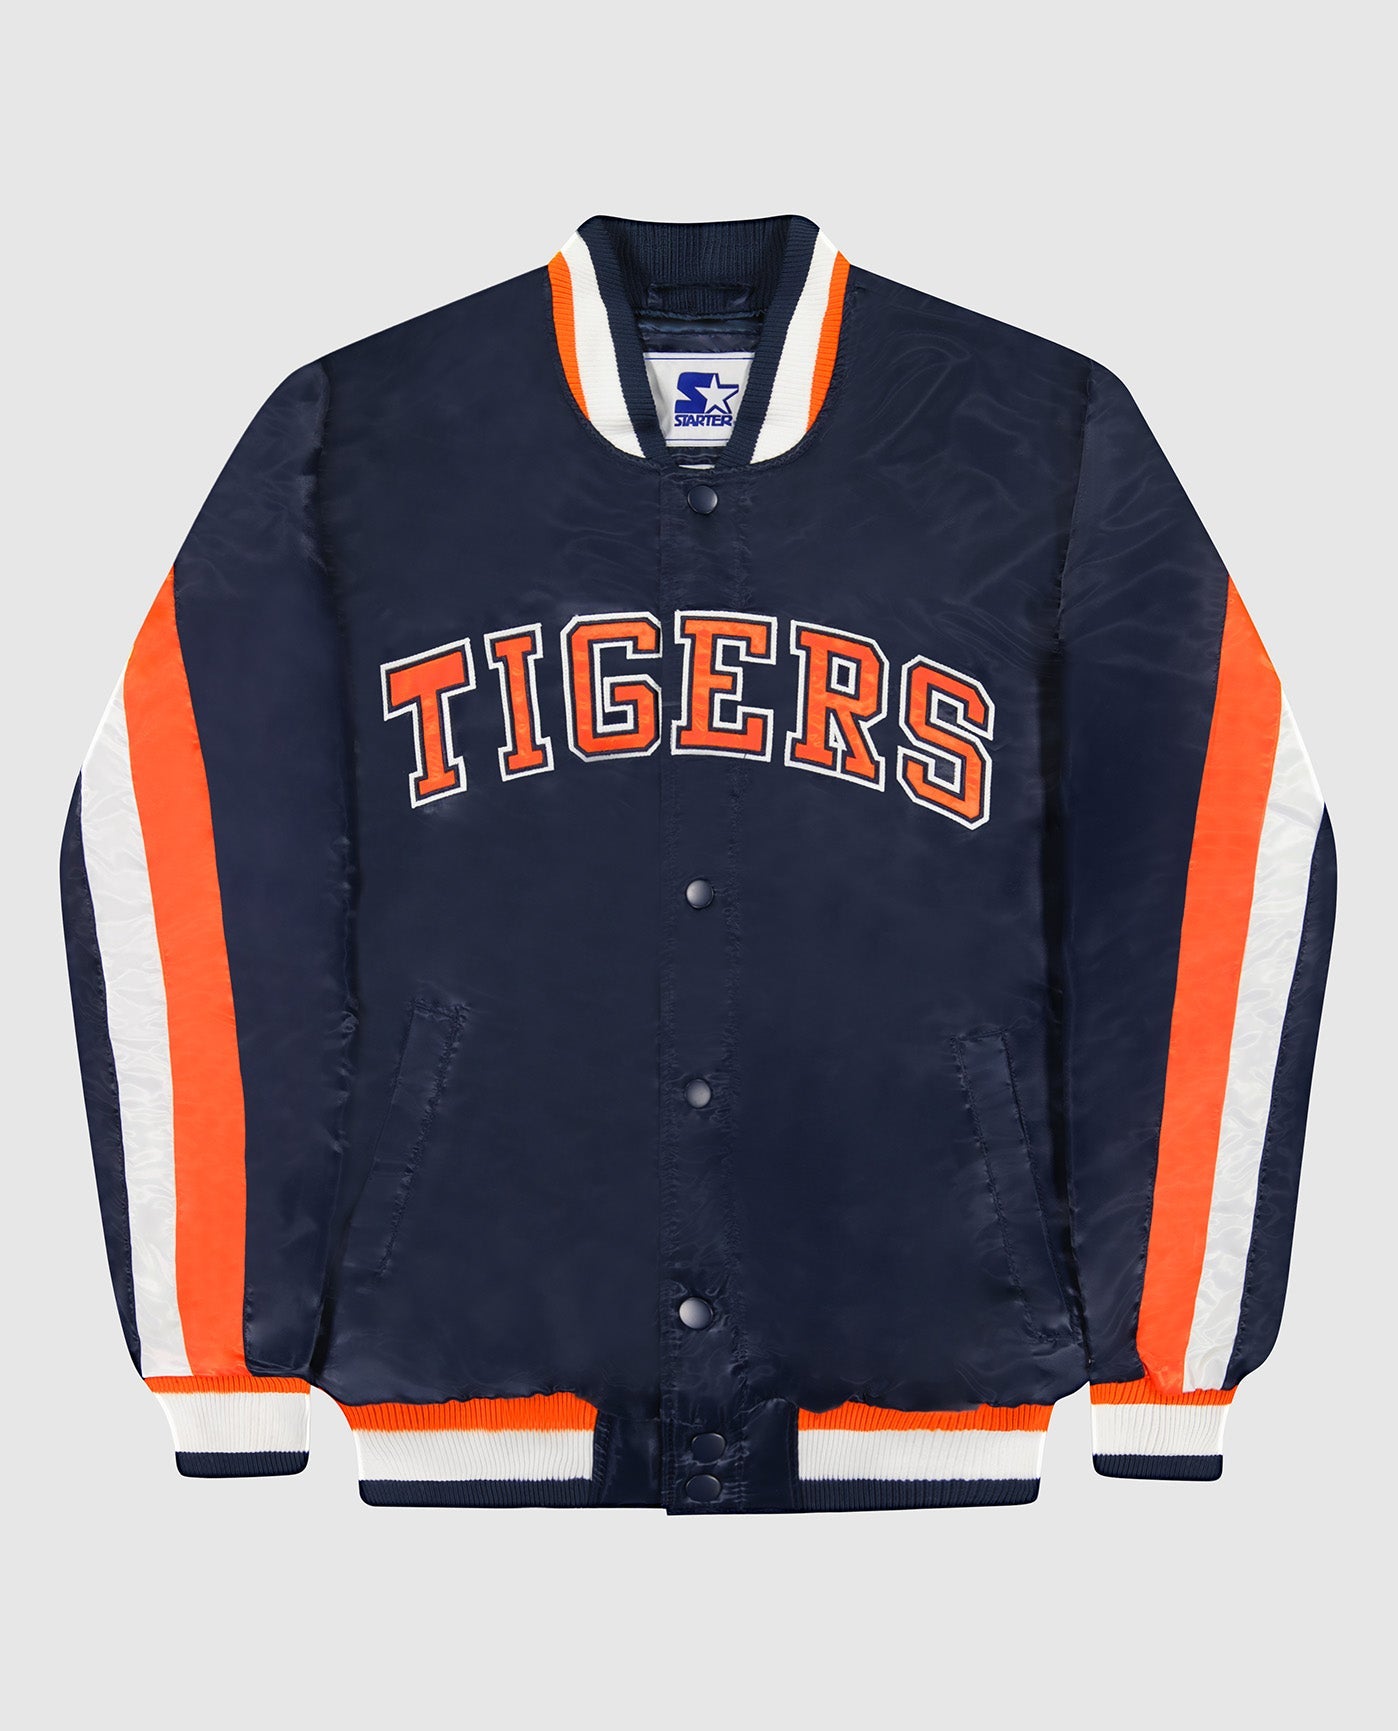 Detroit Tigers White and Blue Jacket